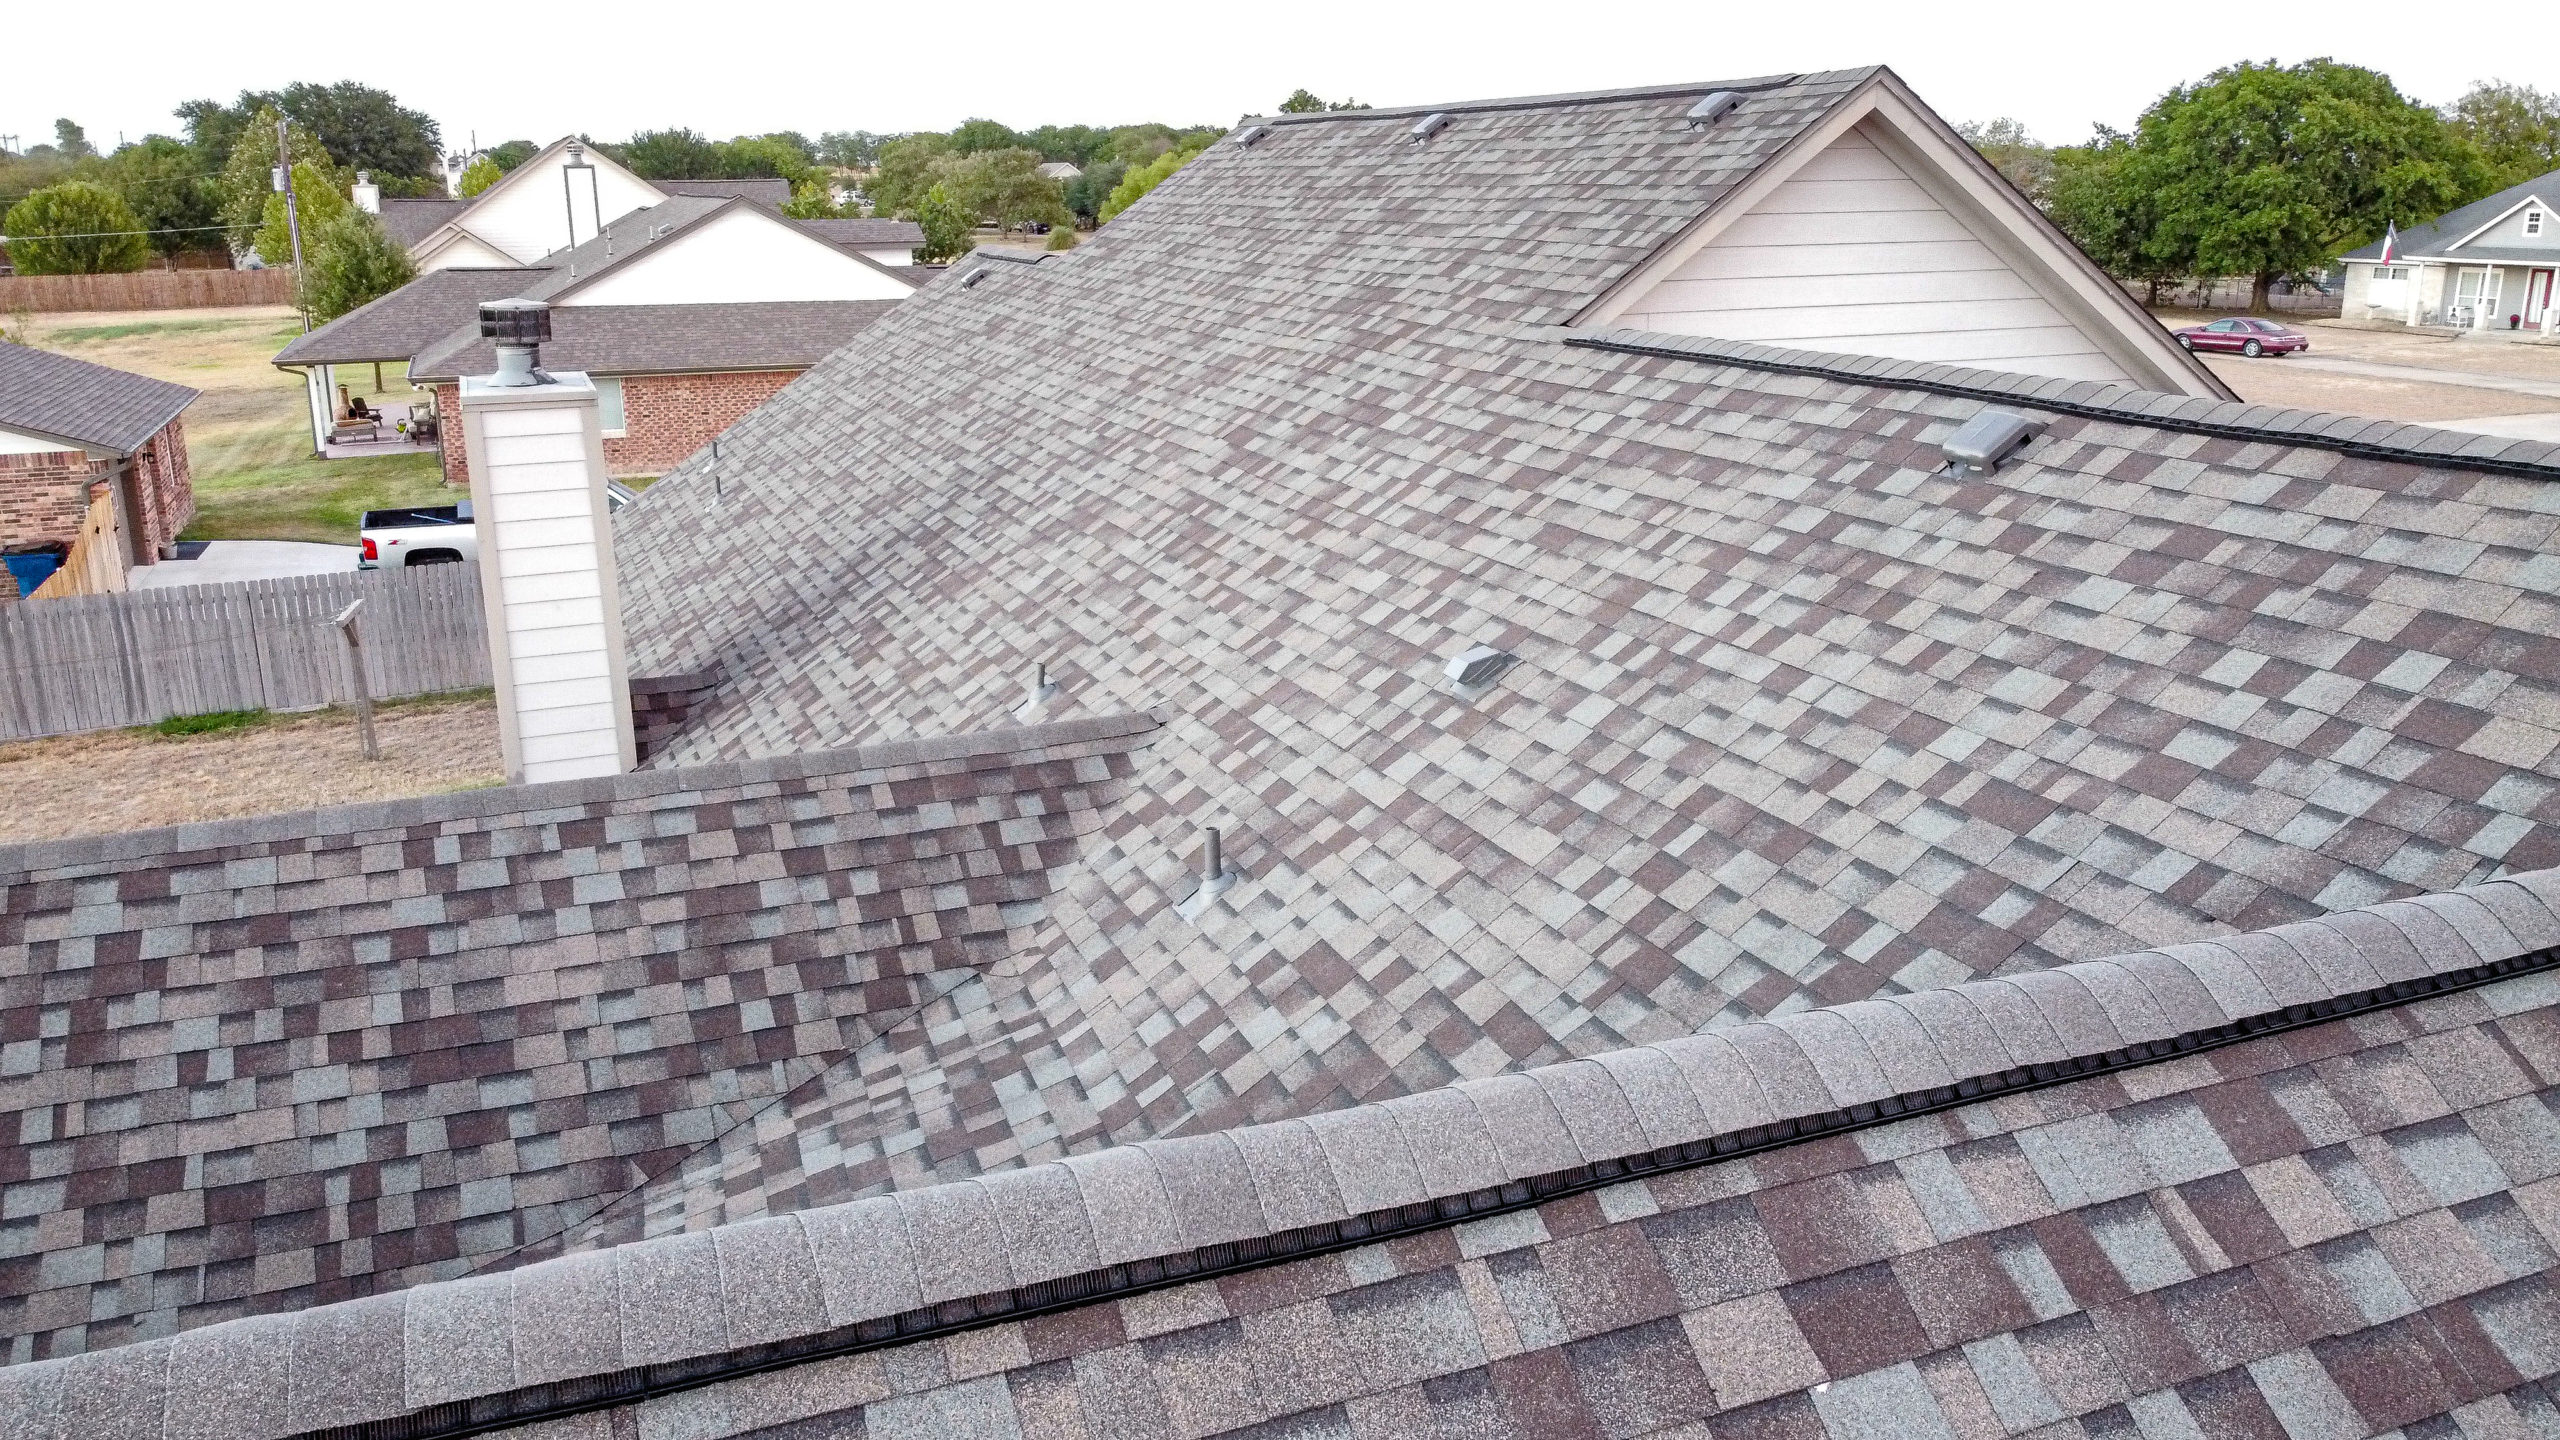 Finished Roof in Temple Texas Cedar Oaks neighborhood by Whitish Roofing in Central Texas